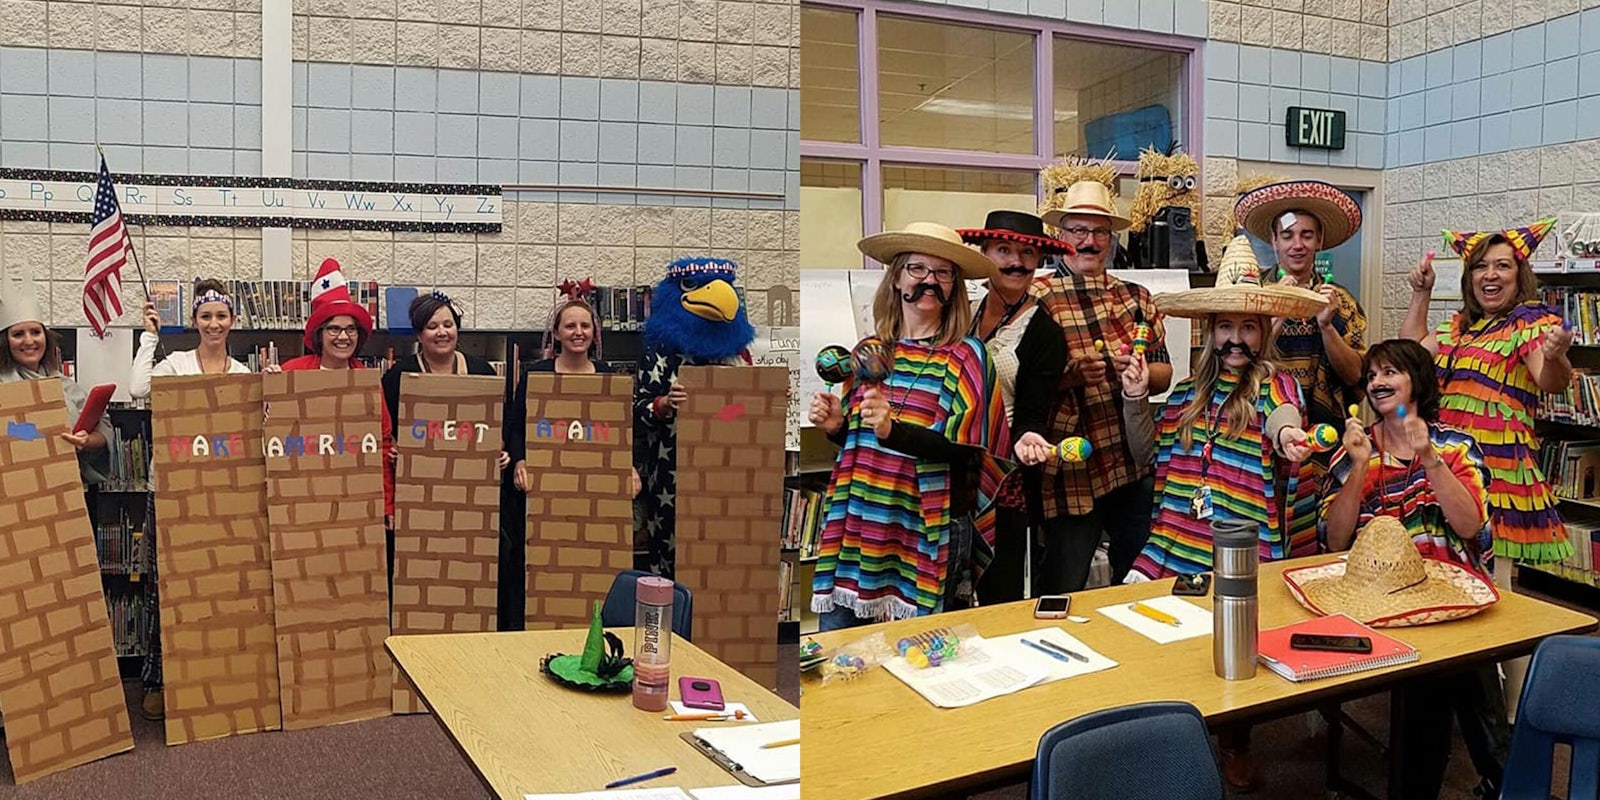 Idaho teachers are under investigation after dressing like a border wall.